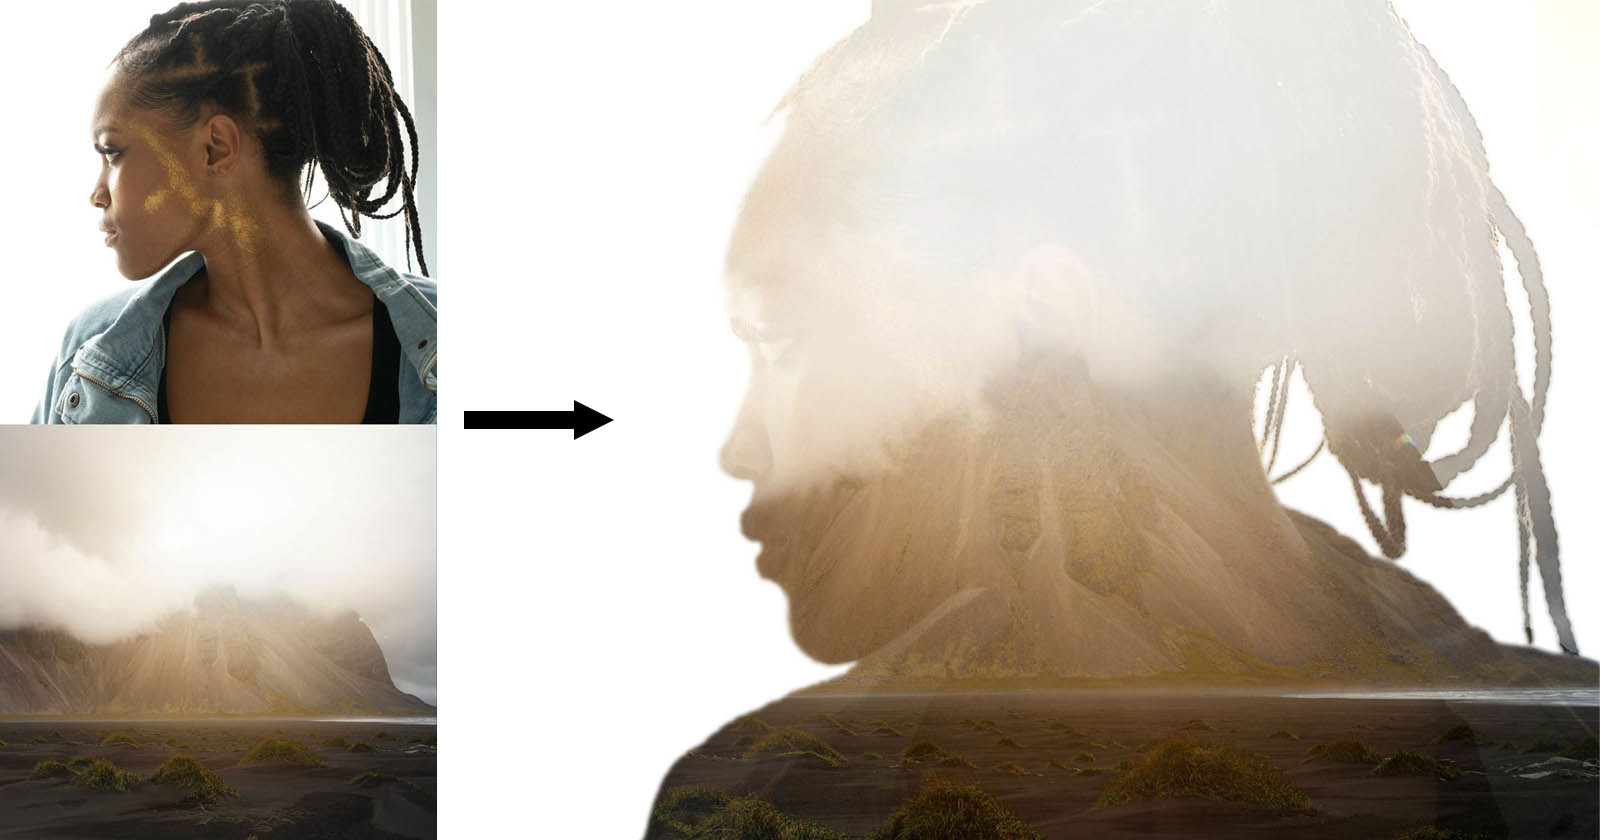 How to Make a Double Exposure Photo in Photoshop